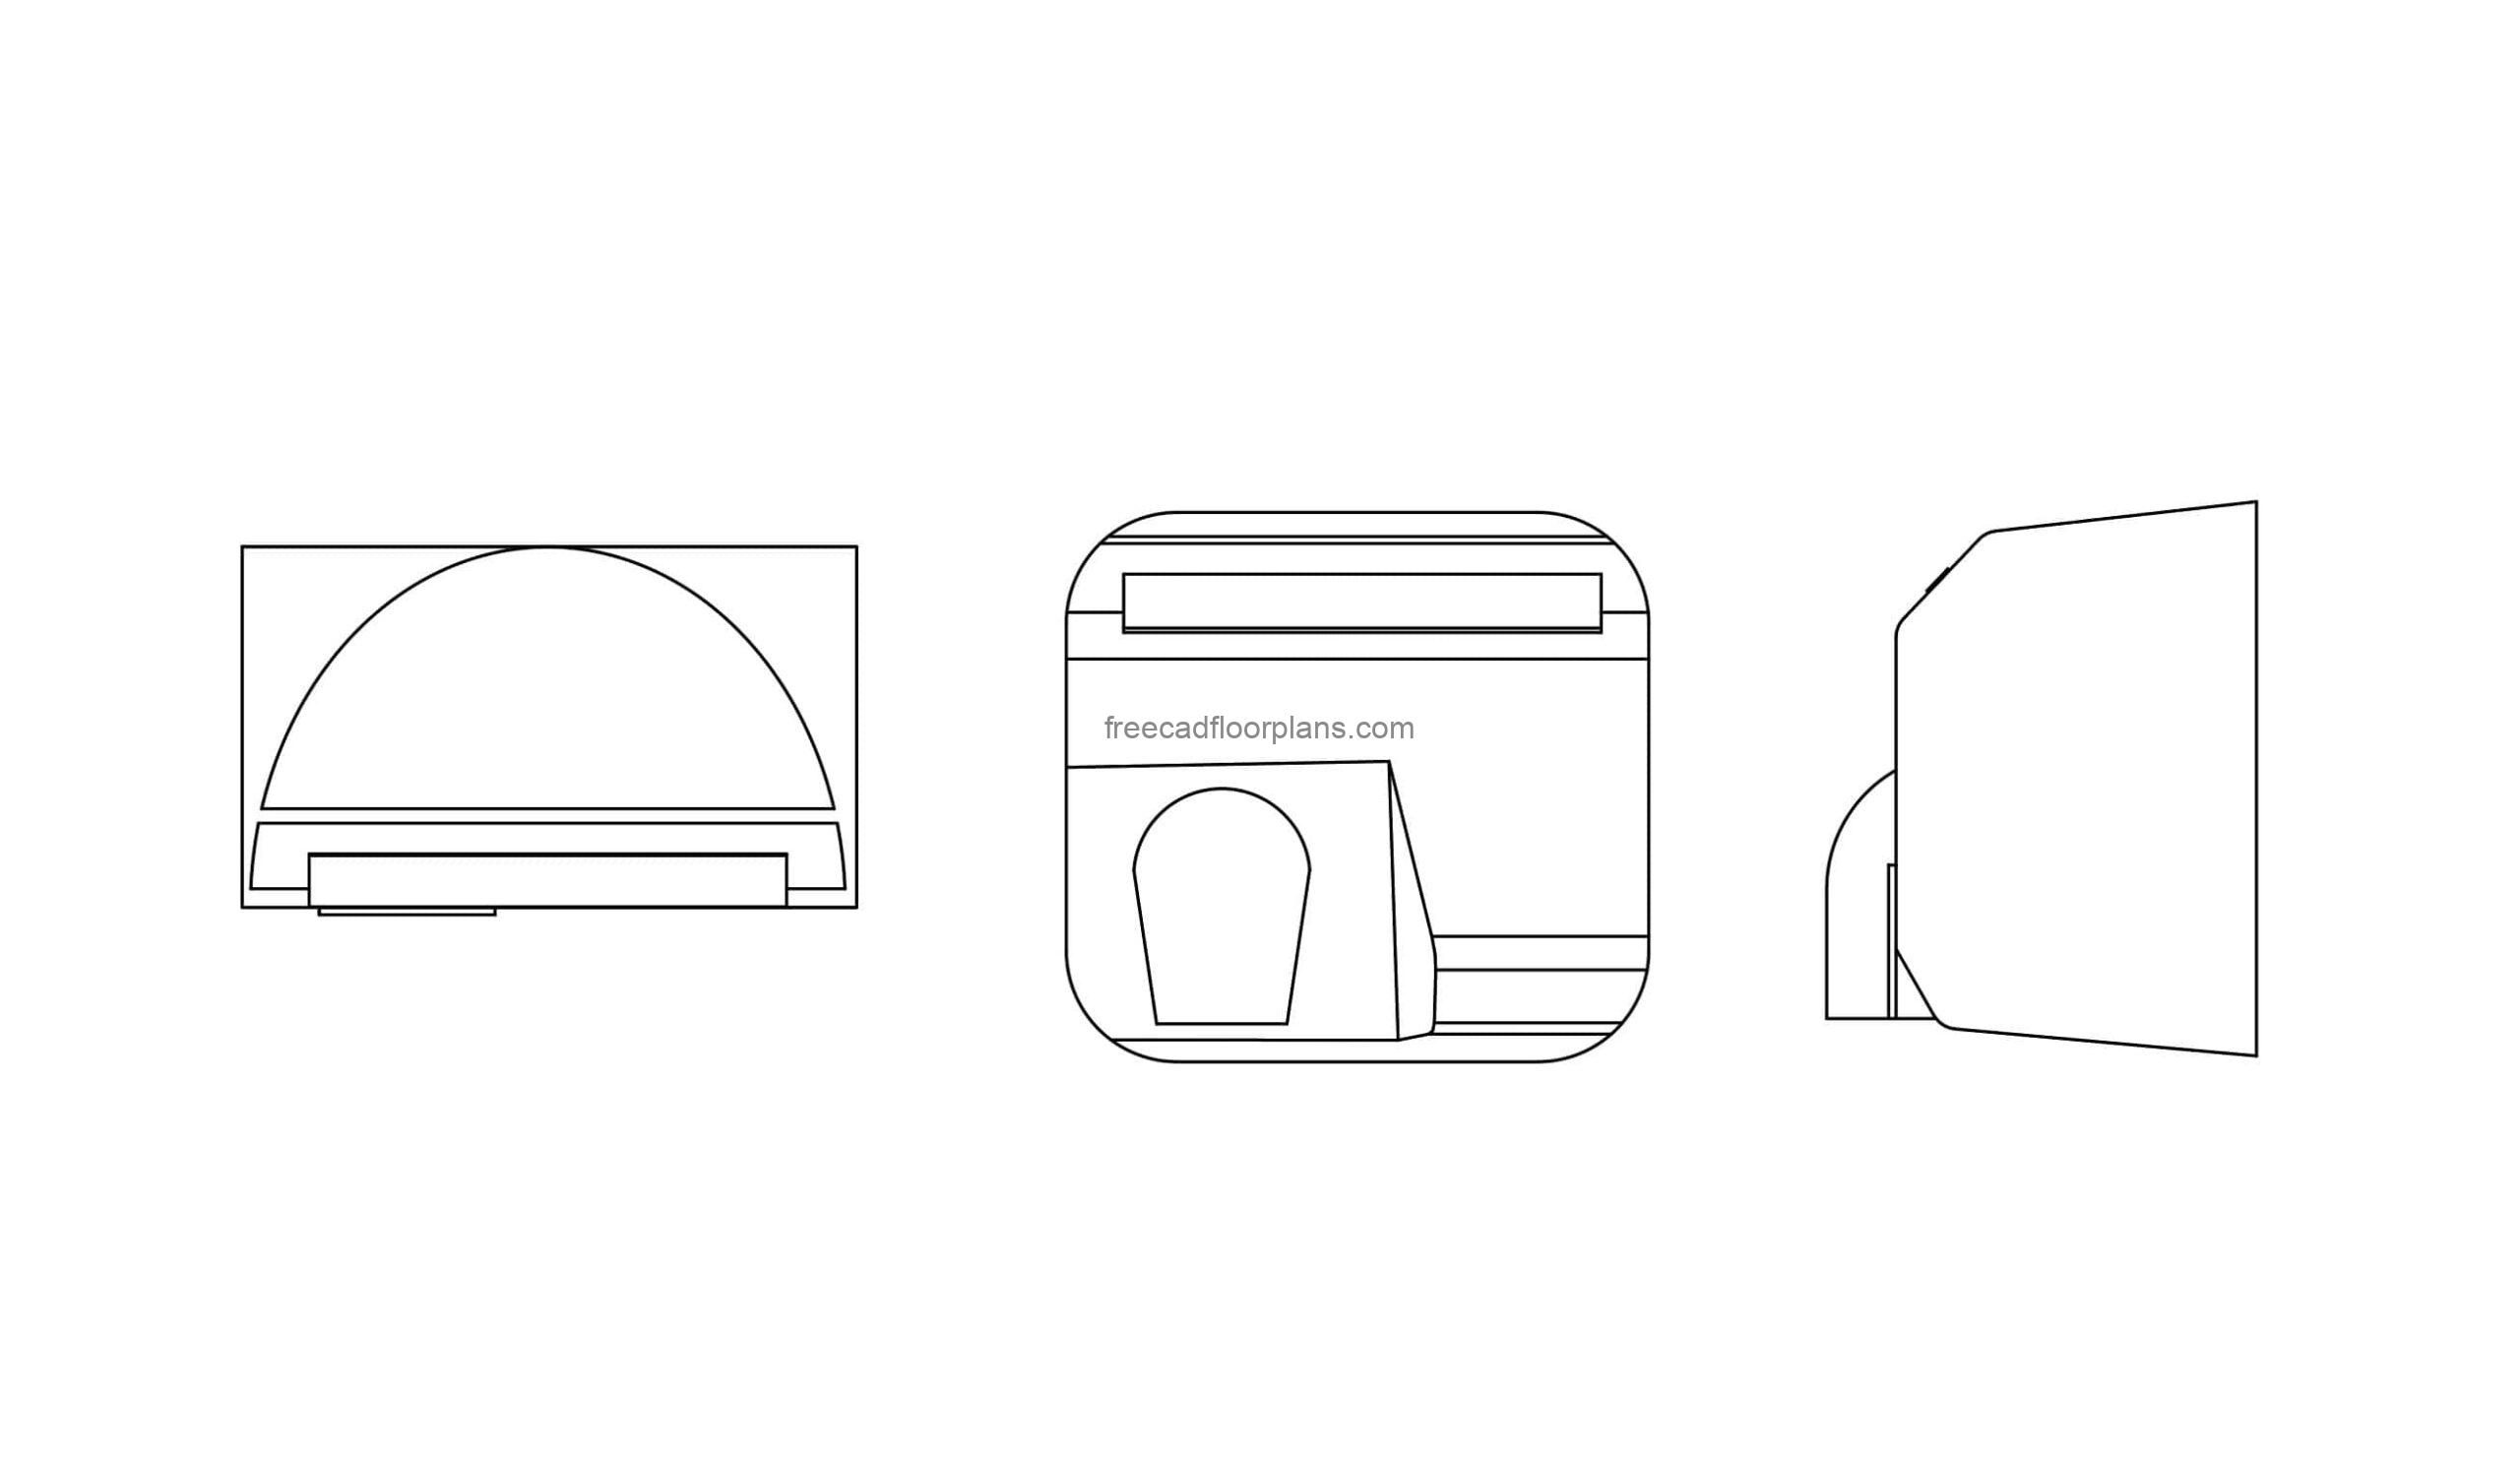 hand dryer dwg drawing model file with all 2d views include for free download